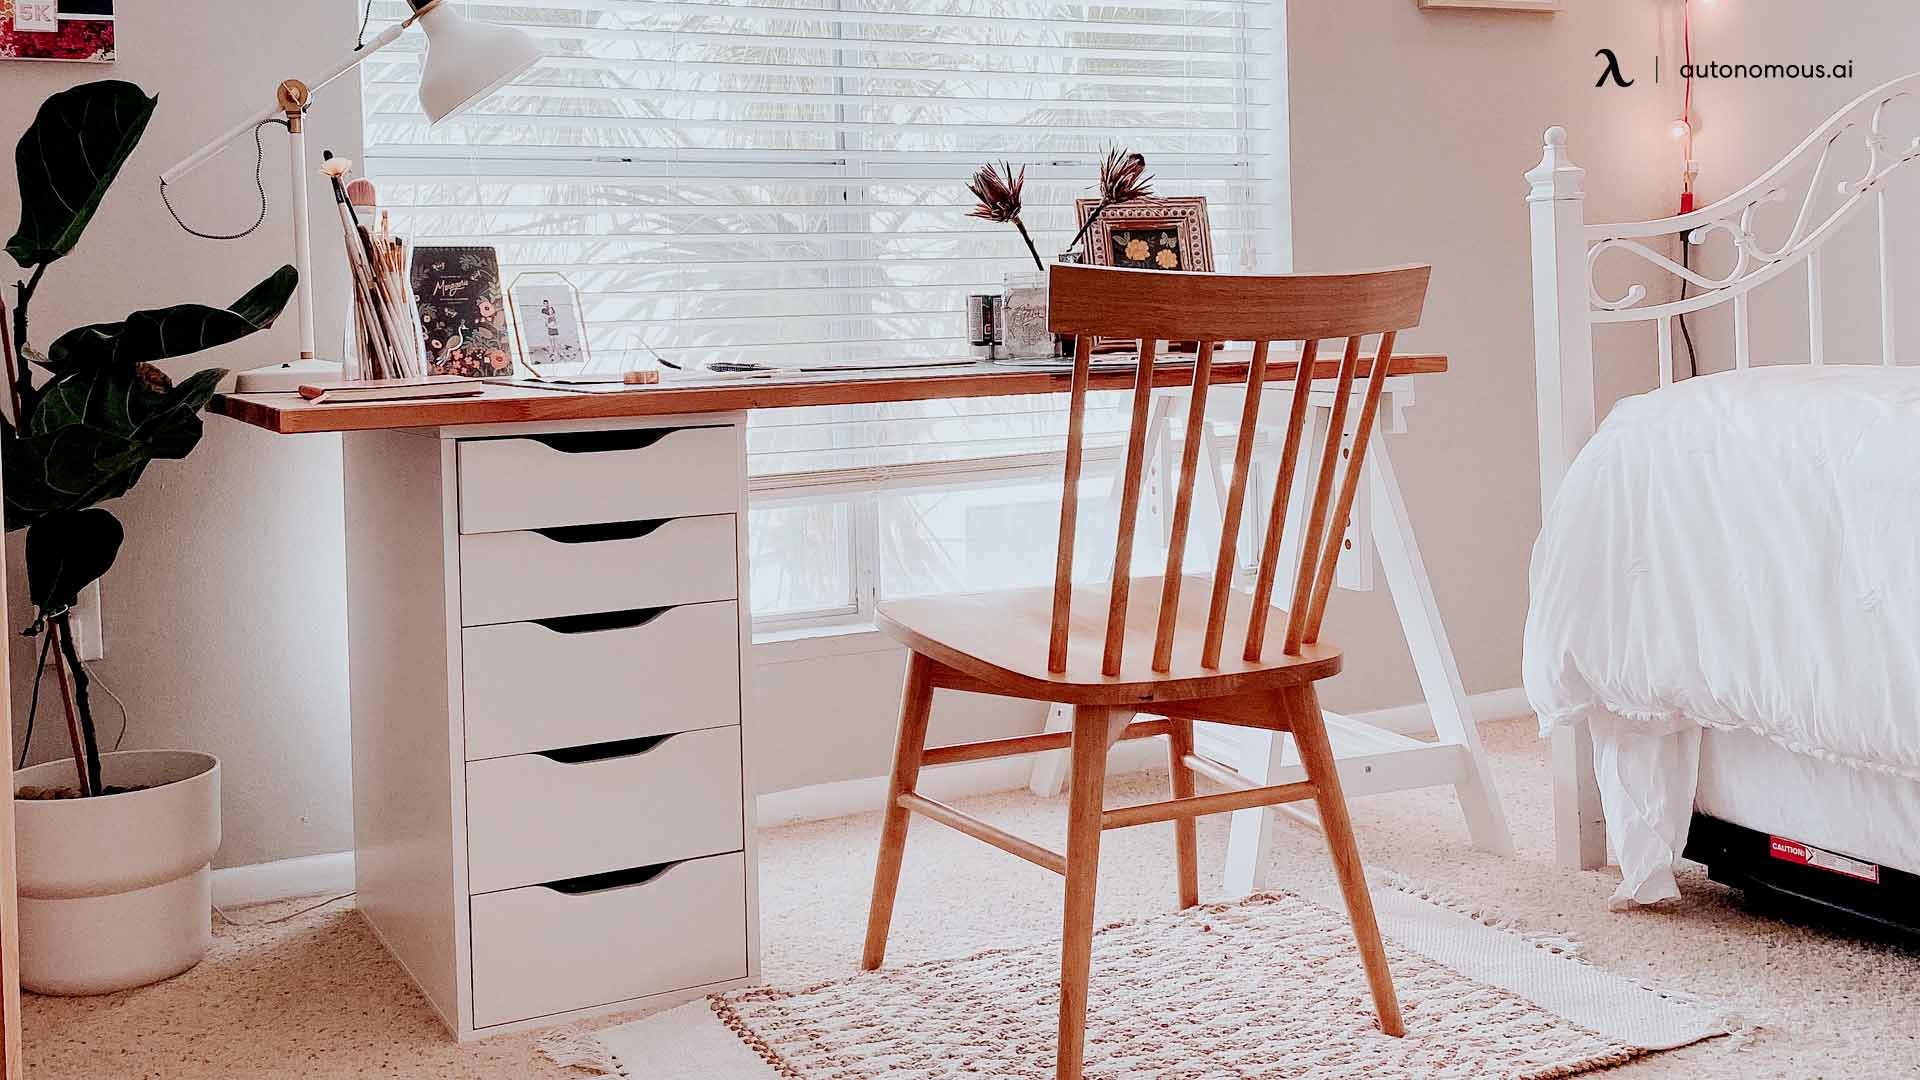 Where To Put Desk In Bedroom? Fengshui Considerations